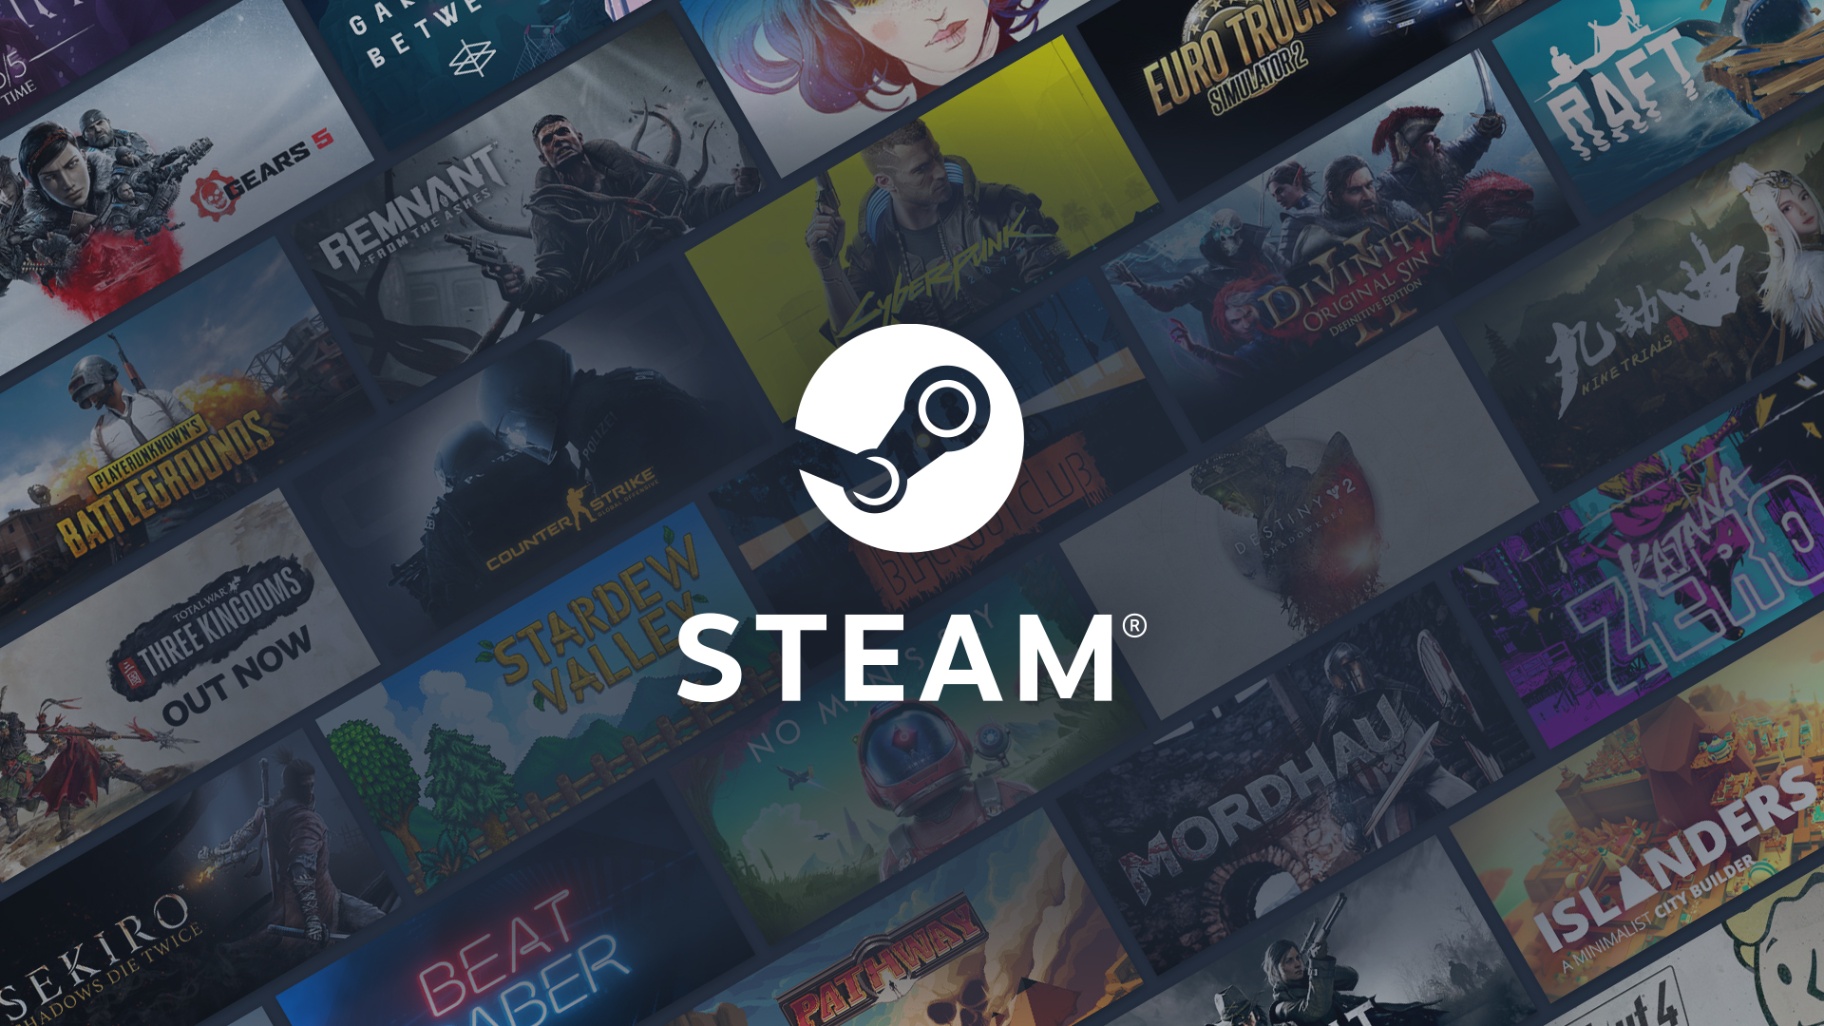 Download the Steam App and Join the Community: Chat with Friends, Browse Groups and More